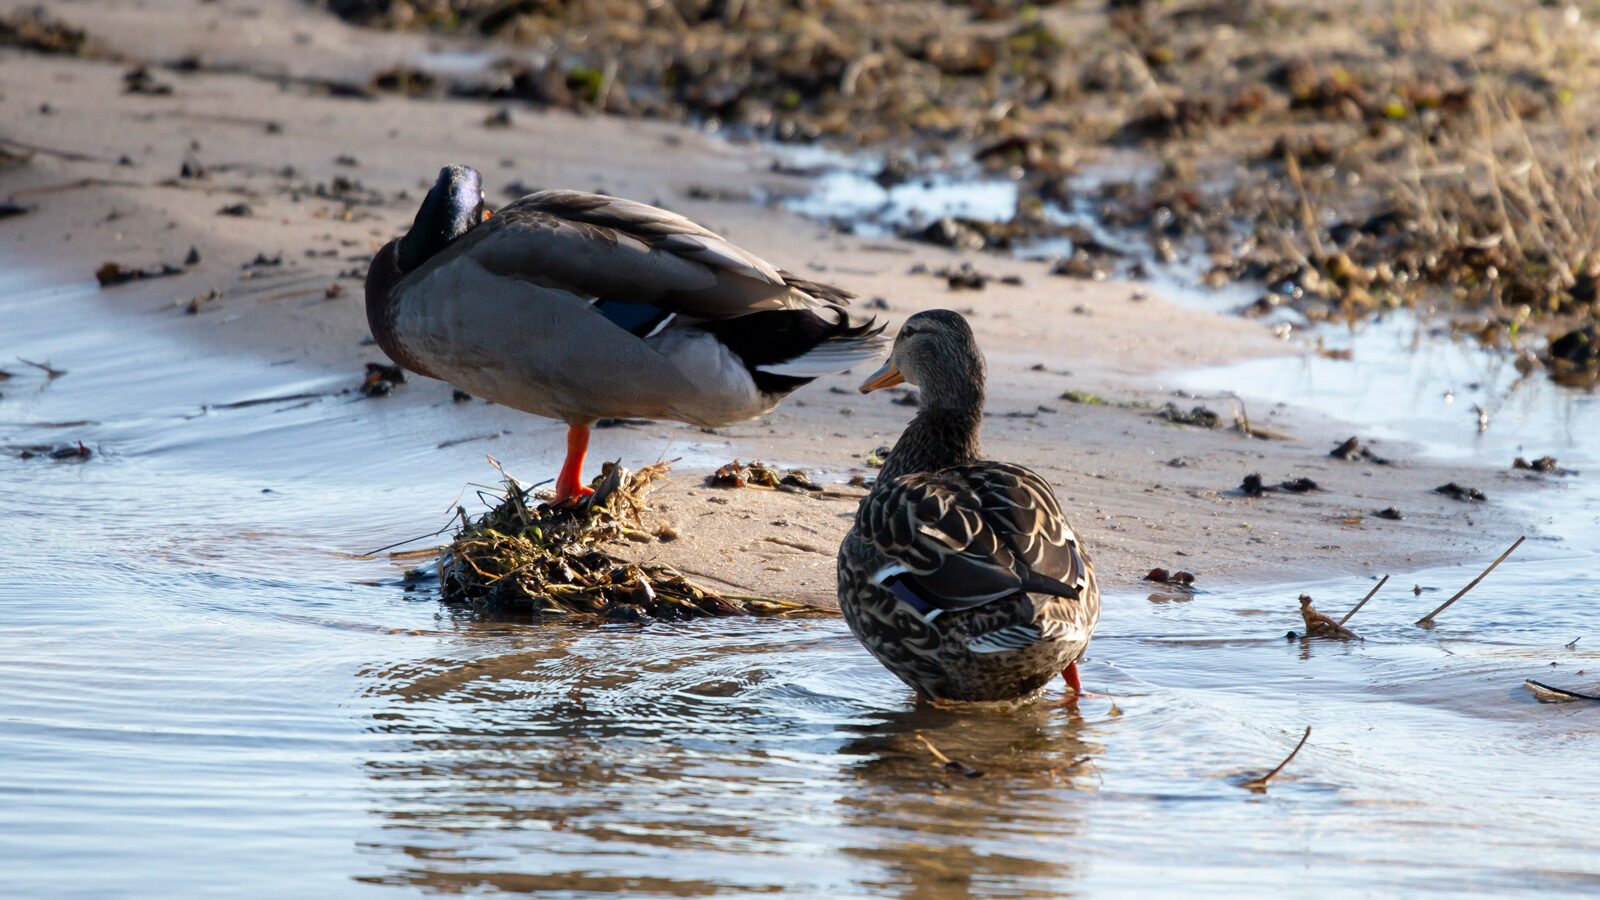 A female mallard stands in shallow water while another female mallard stands on sandy shore